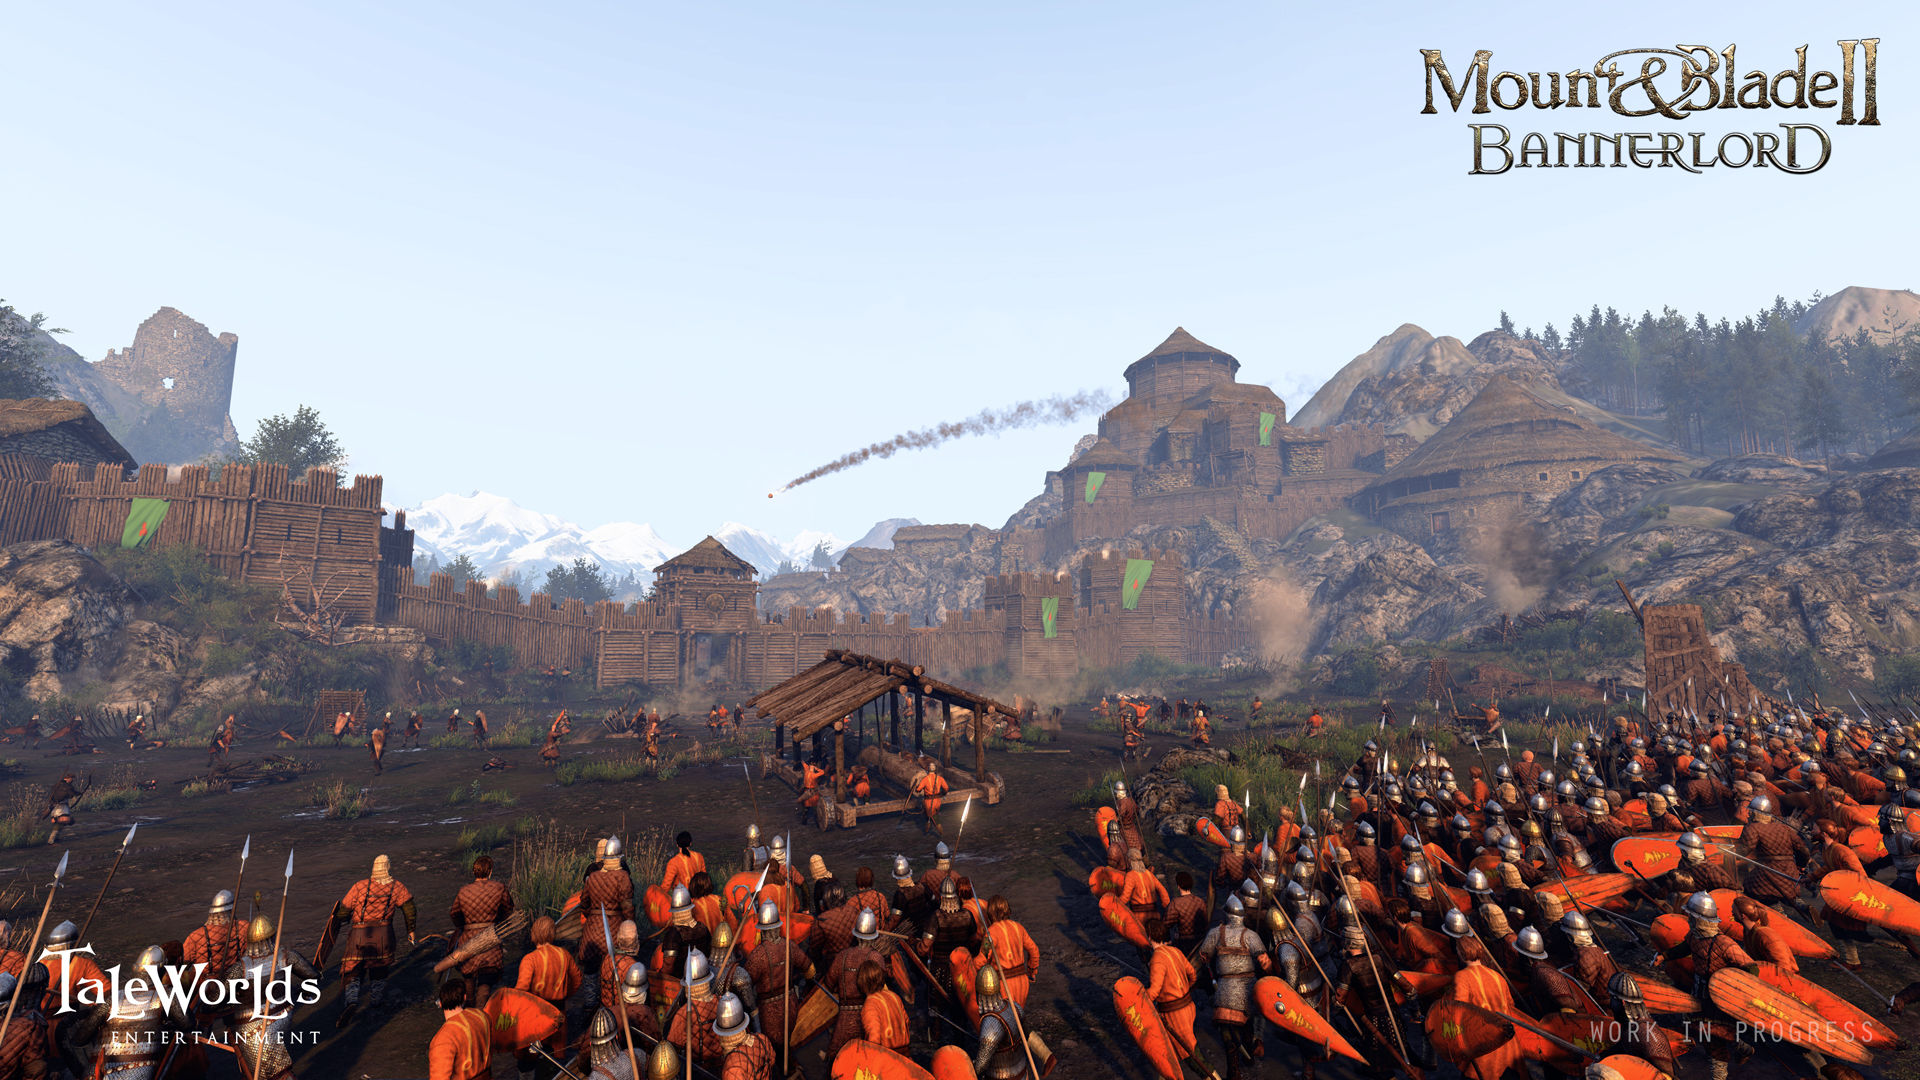 Video Game Mount & Blade II: Bannerlord Wallpaper